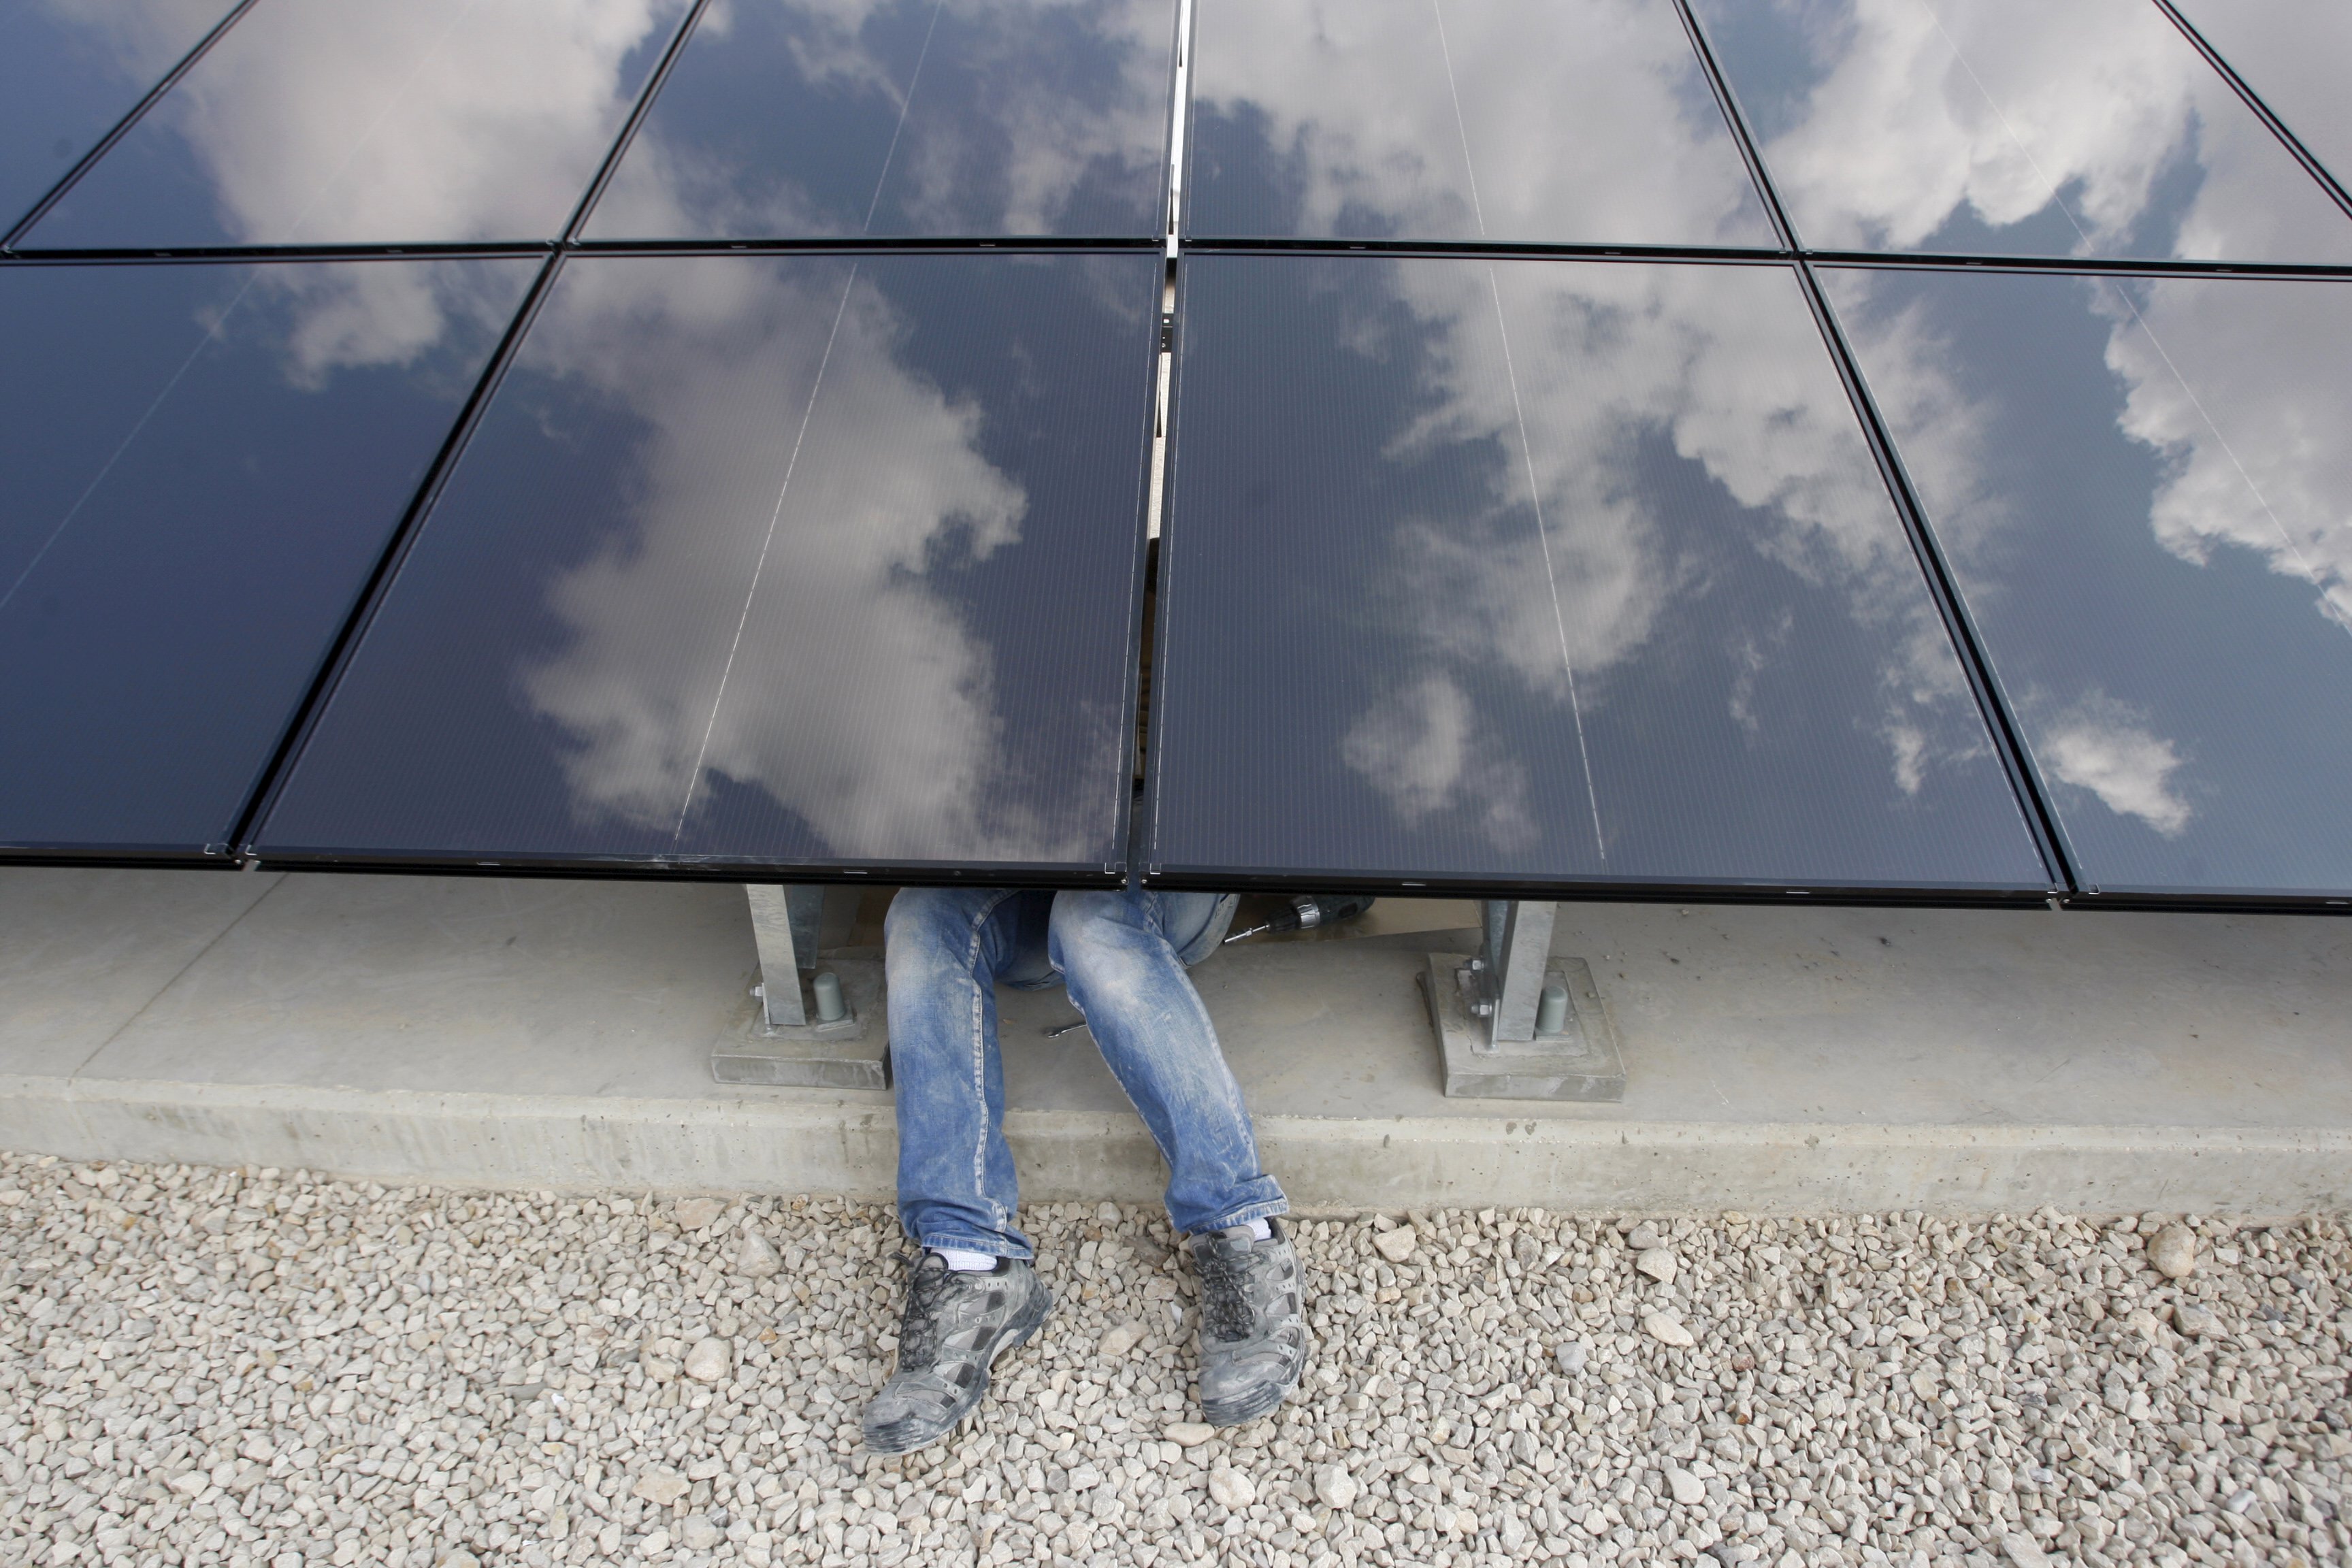 A Palestinian labourer installs solar panels at a photovoltaic plant in the West Bank city of Jericho in this March 27, 2012 file photo. Renewables are powering a rare bright spot in the energy industry, with record job hiring in solar, wind and hydro partly offsetting the biggest round of job losses in the oil and gas sector in almost two decades. The fresh opportunities come as the oil sector is suffering its worst downturn since the late 1990s, encouraging engineering students to rethink their options and even mid-career switches for some who have spent more than a decade in the oil sector. REUTERS/Mohamad Torokman/Files